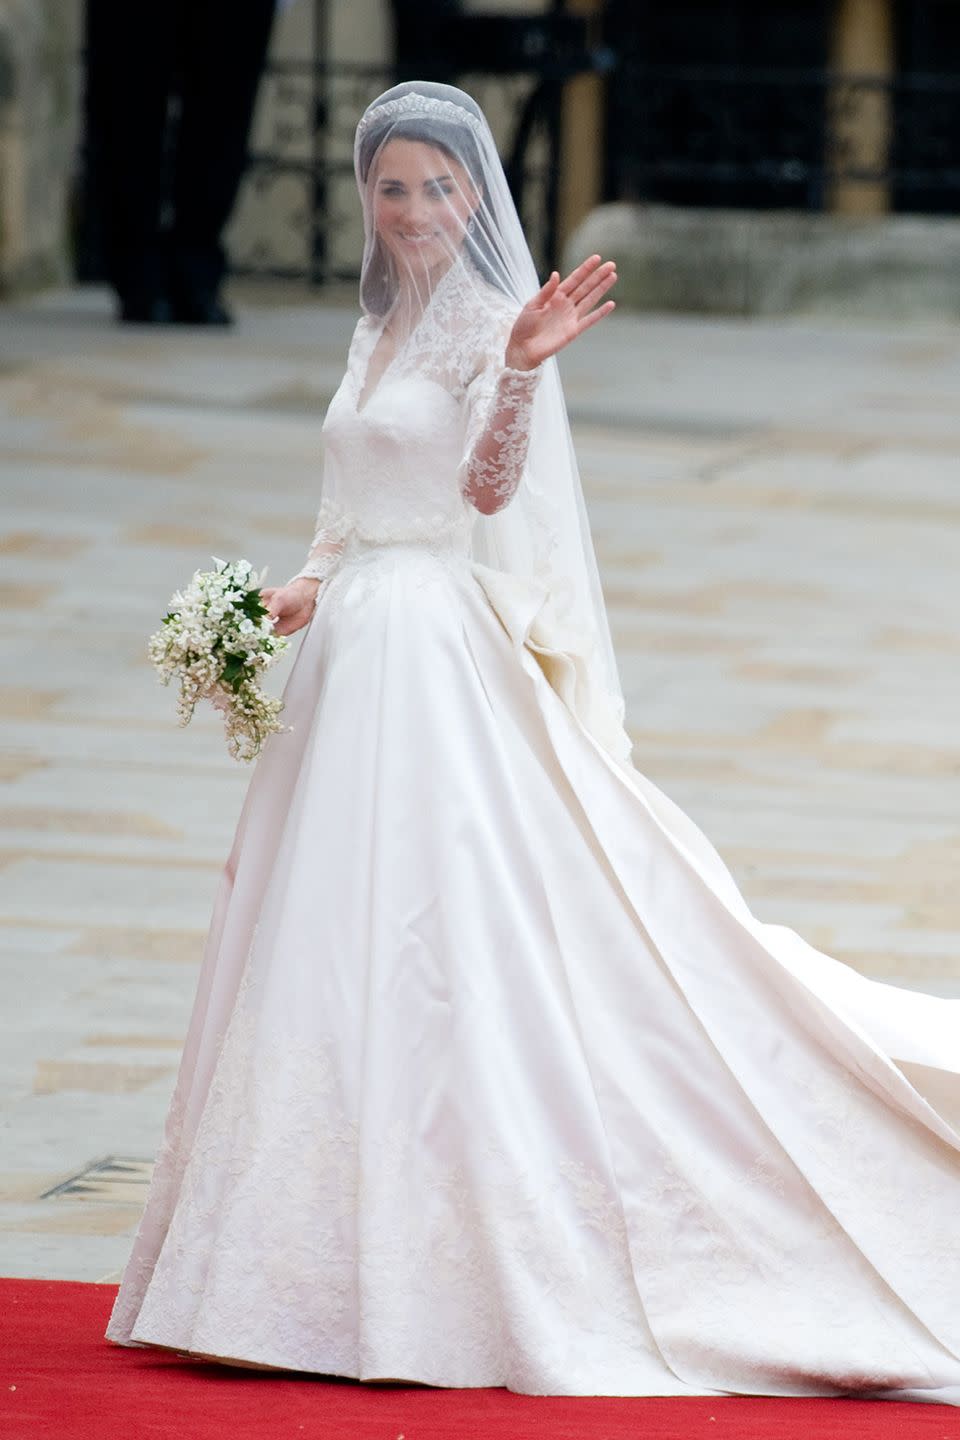 <p>Practically the whole world was watching when the Duchess of Cambridge arrived at Westminster Abbey to wed Prince William. Designed by Sarah Burton for Alexander McQueen, the dress sparked a million copycats — and a celebration of lace sleeves.</p>